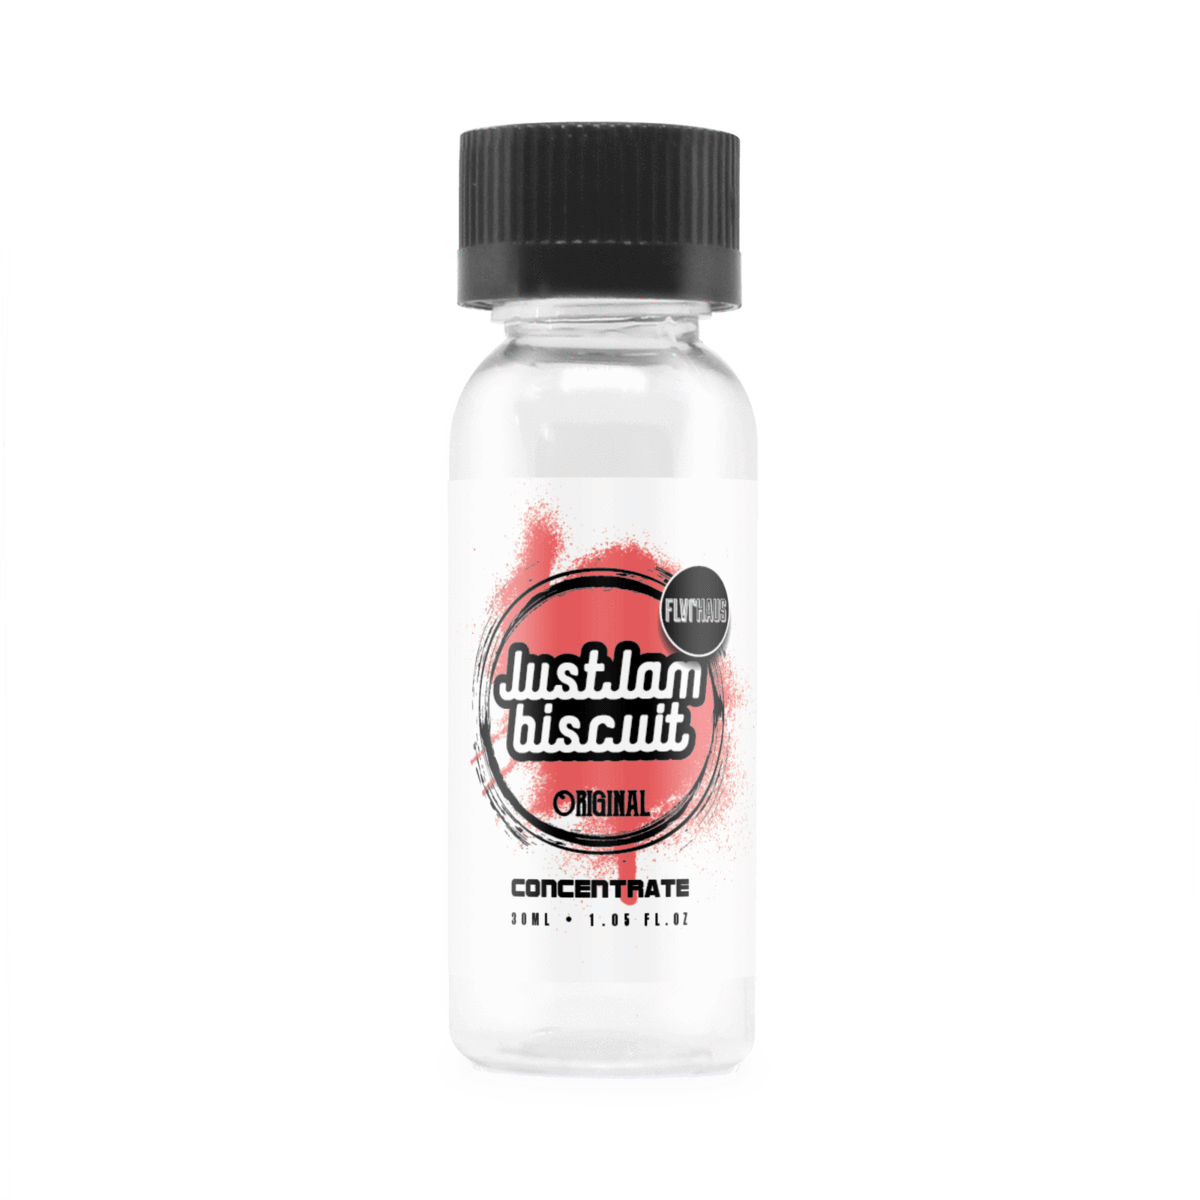 Original Biscuit Concentrate E-Liquid by Just Jam 30ml